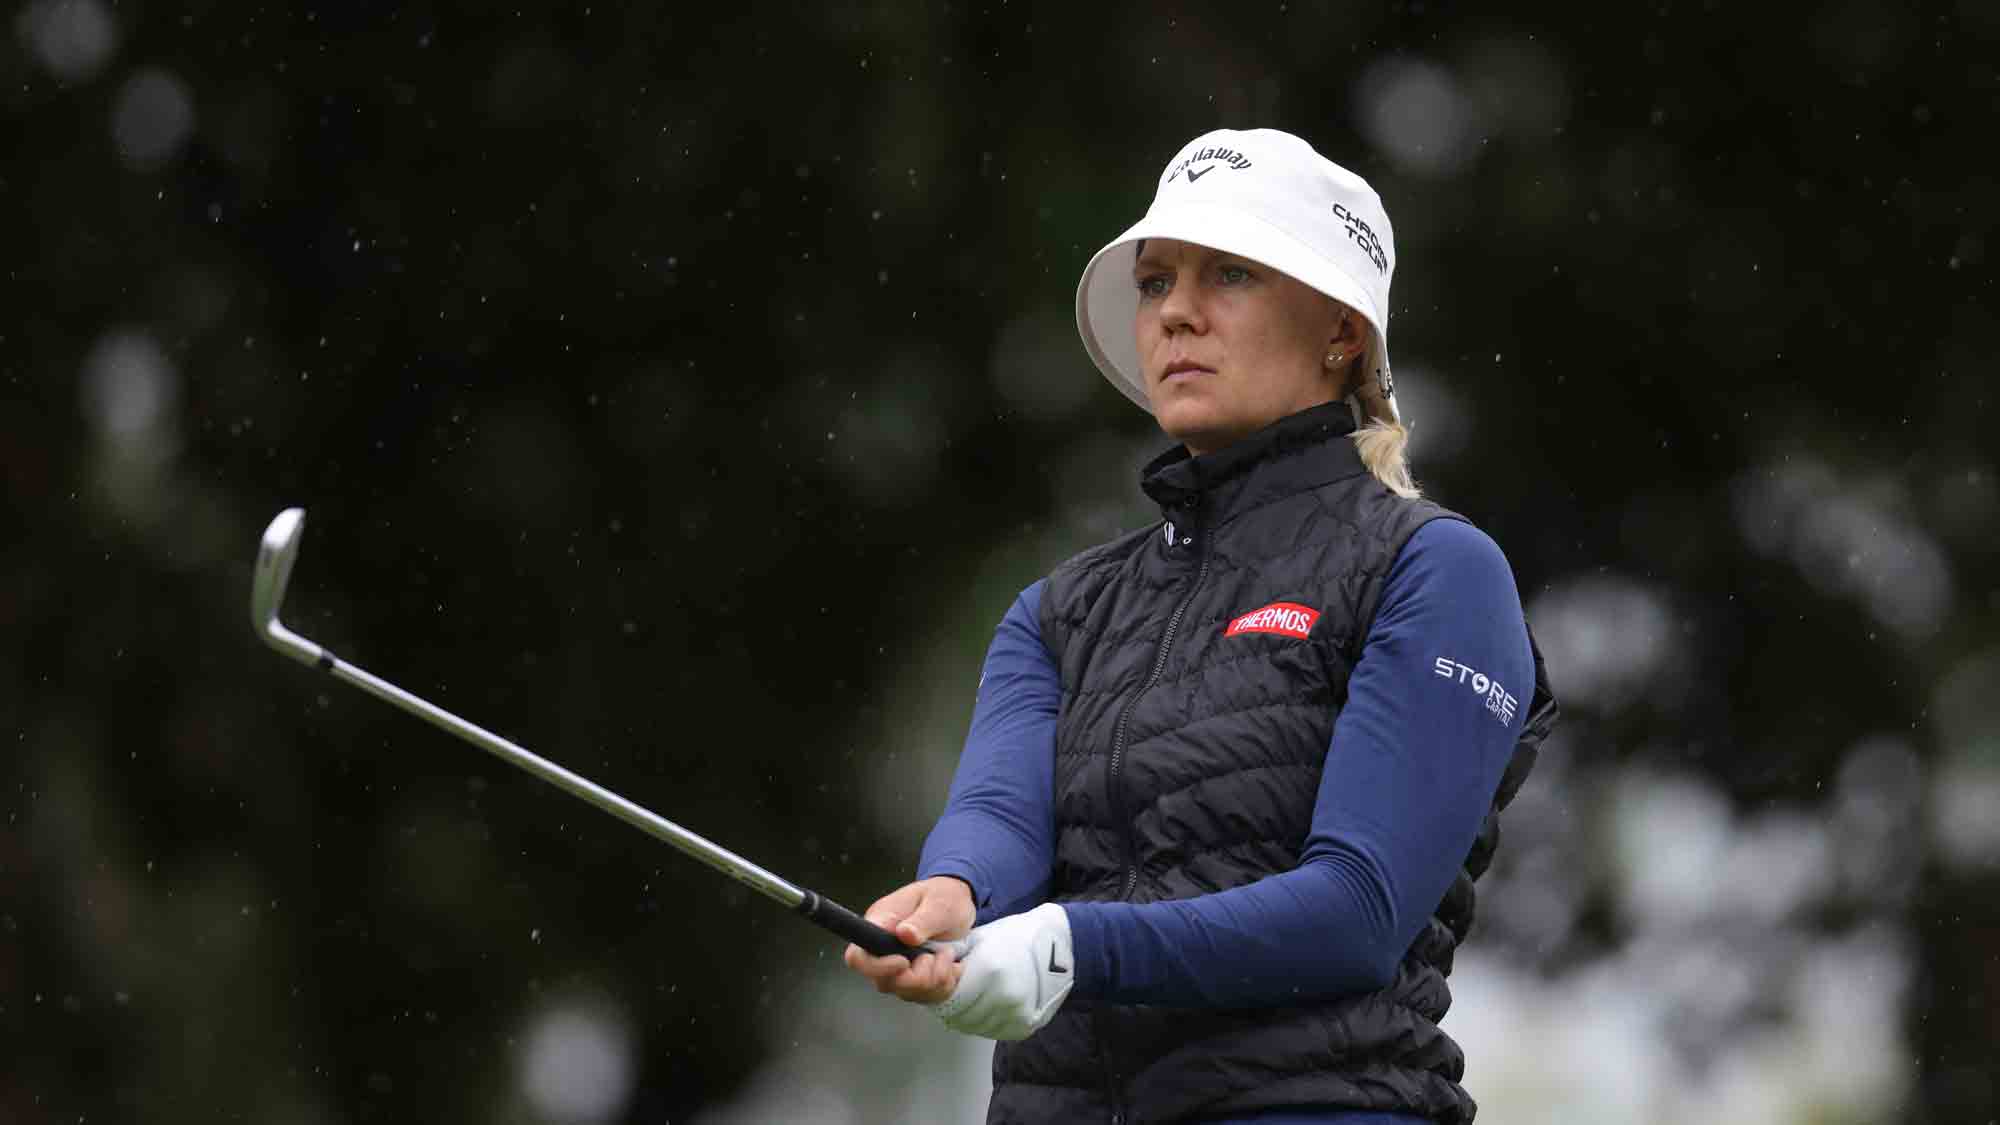 Sagstrom, Zhang Share Lead at Cognizant Founders Cup LPGA Ladies